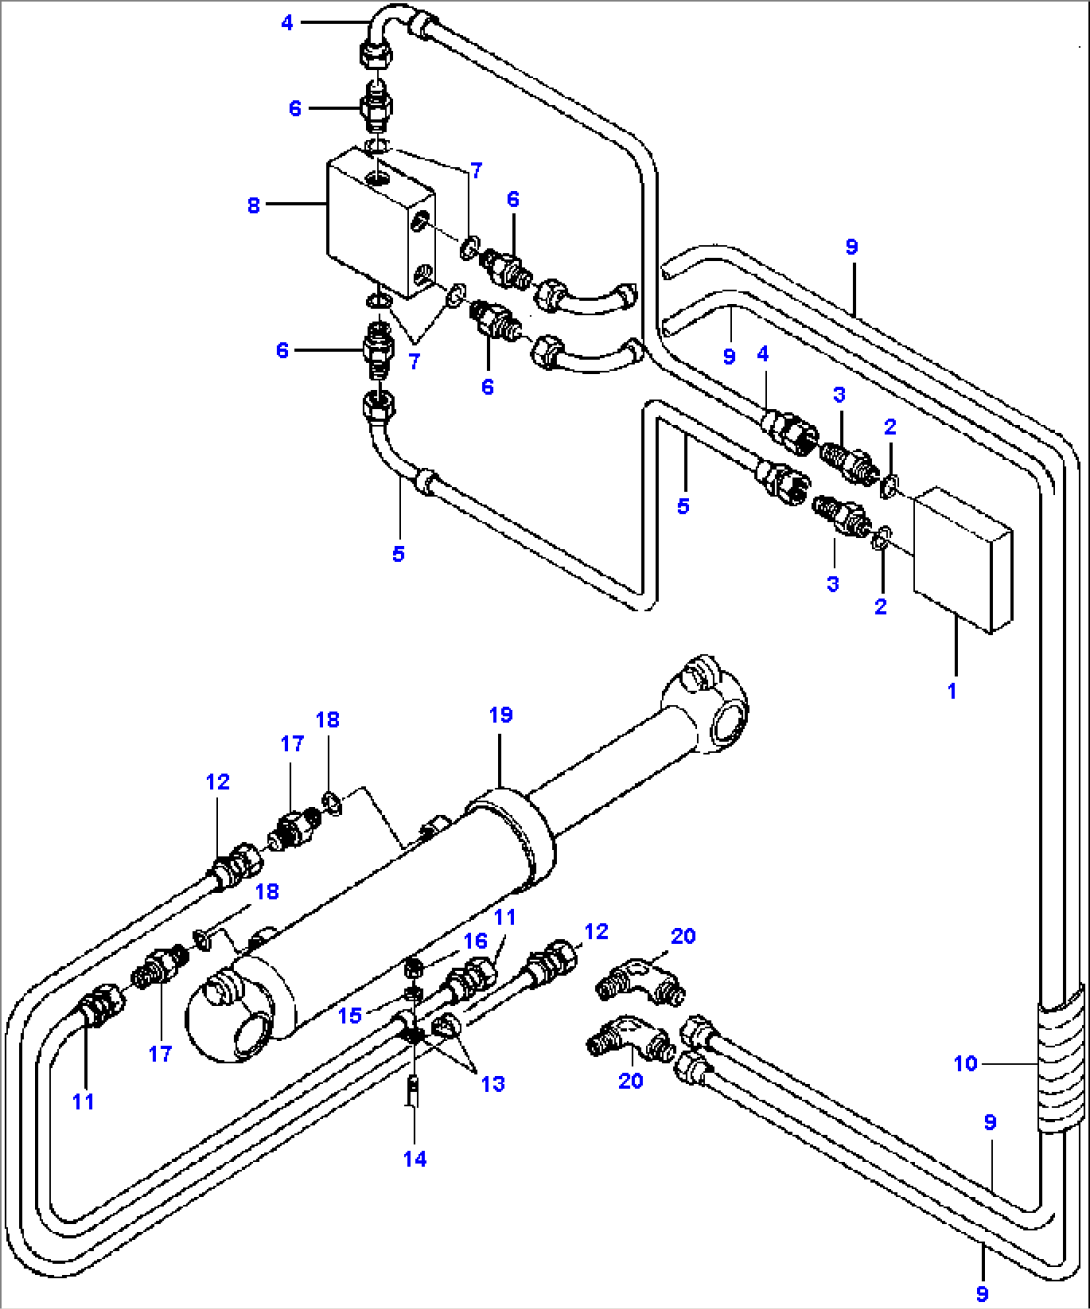 DRAWBAR SIDE SHIFT ACTUATOR LINES R.H. AND L.H. 90 DEGREE BLADE SUSPENSION - S/N 203501 AND UP